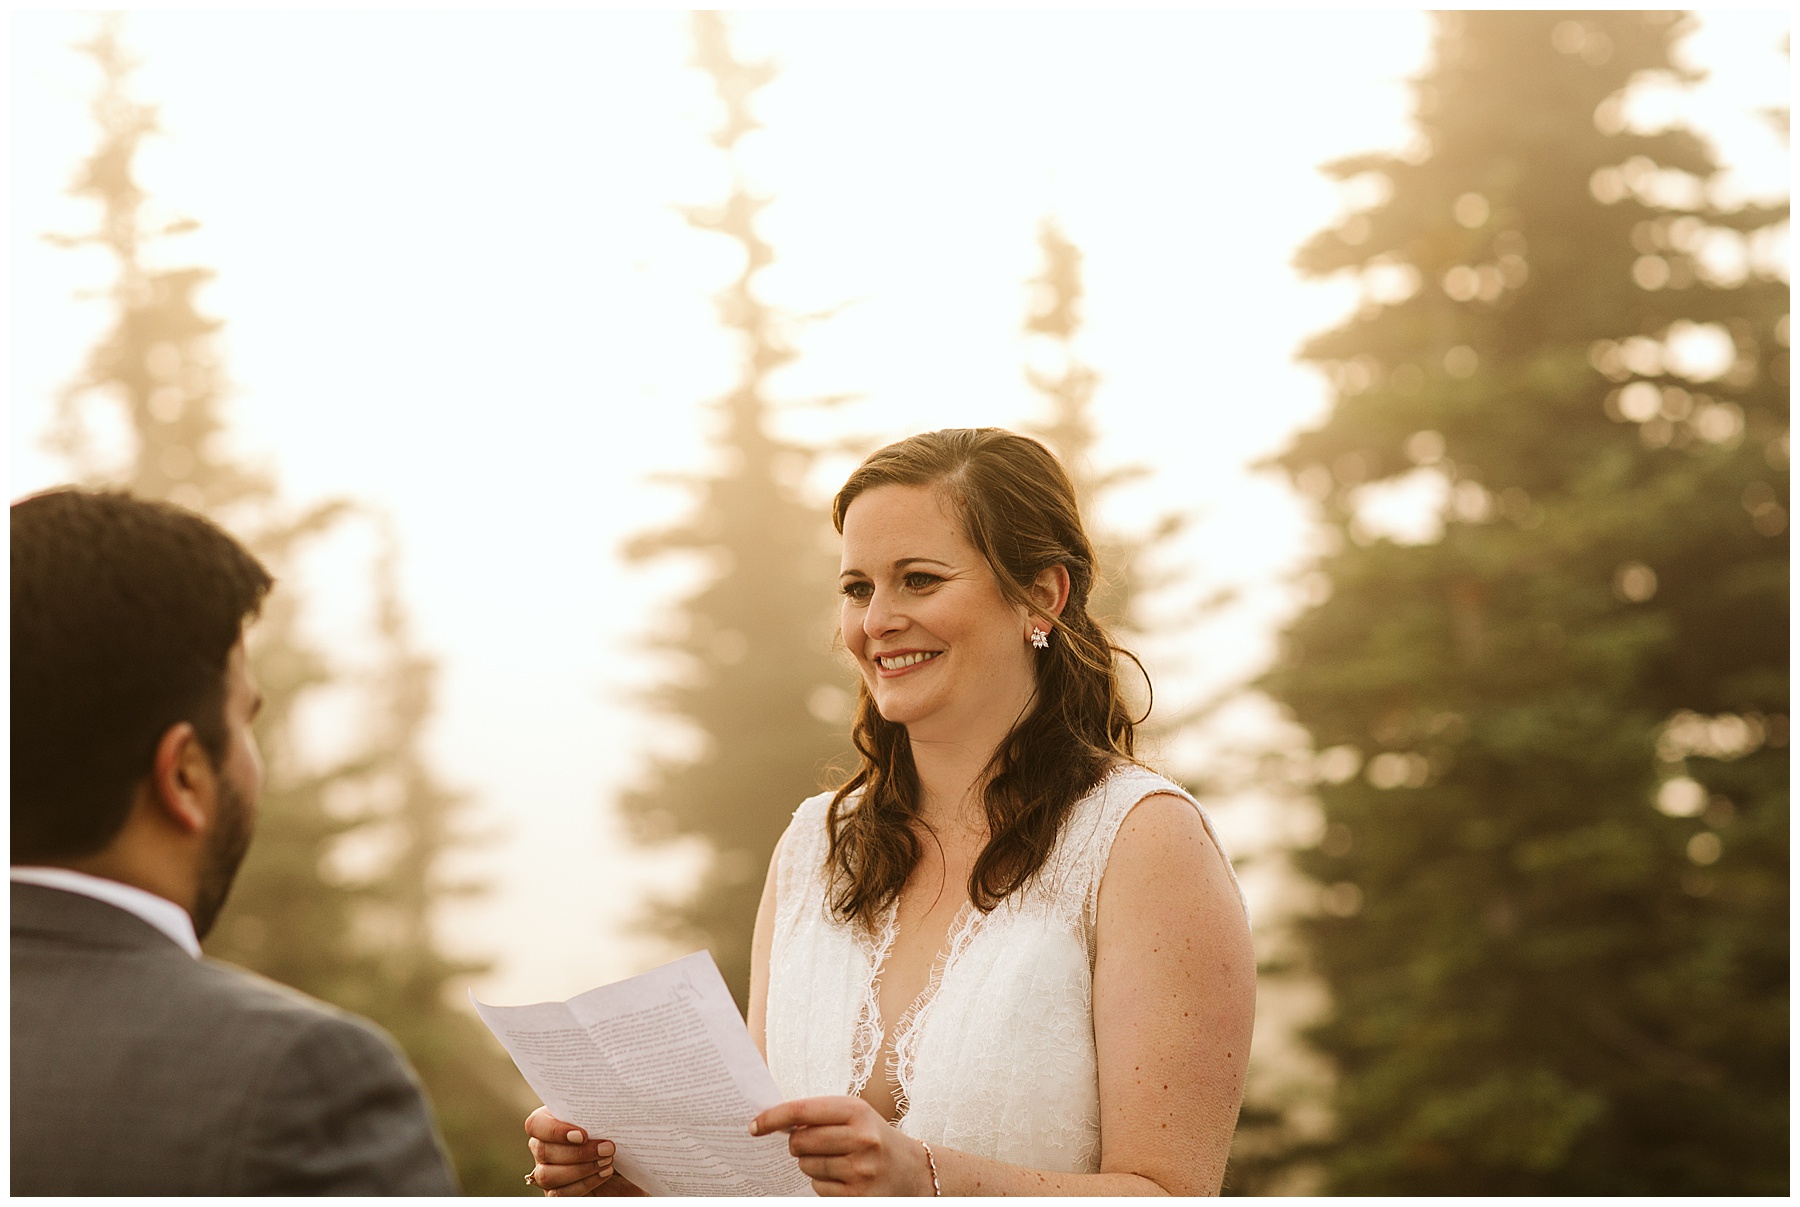 emily holds her printed vows, smiling at jay during their elopement ceremony in mount rainier.